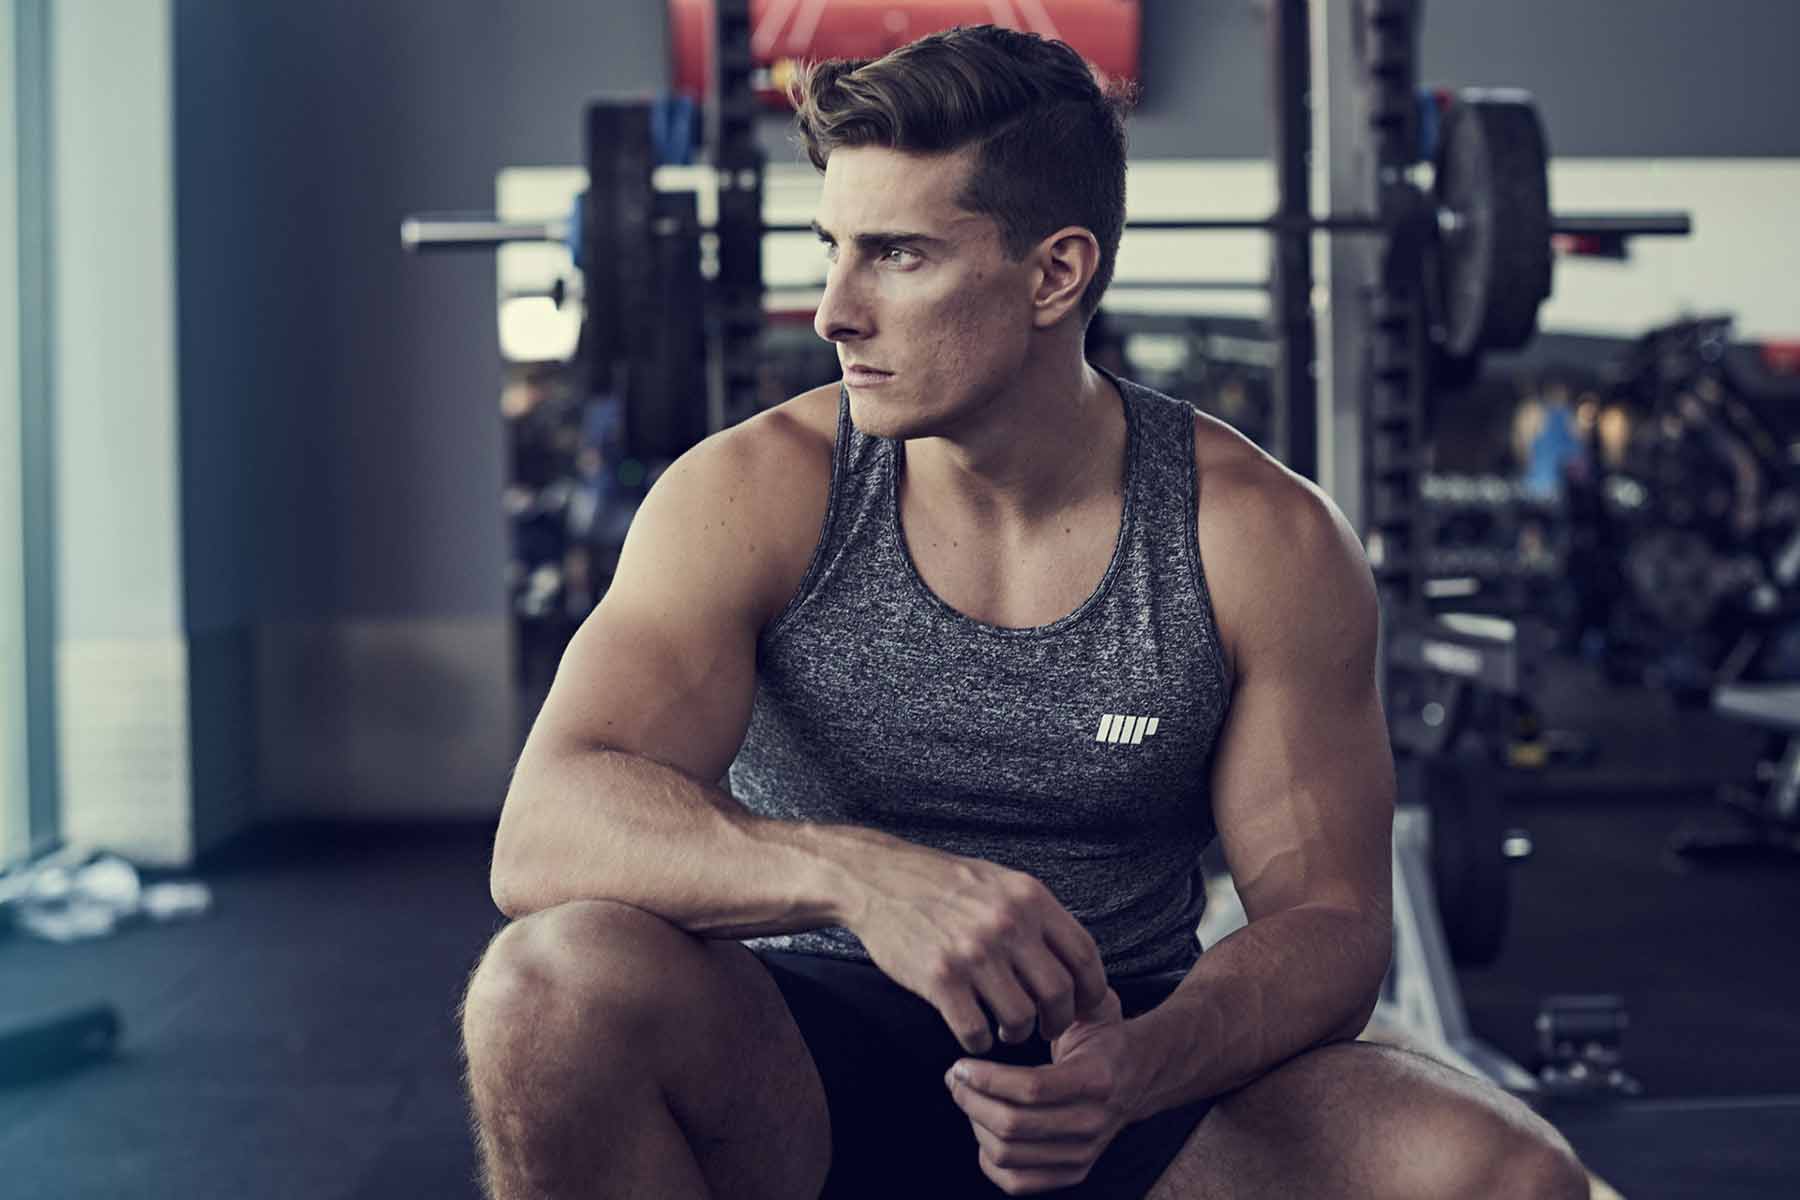 Gym Etiquette | Are You Guilty Of These Bad Gym Habits?